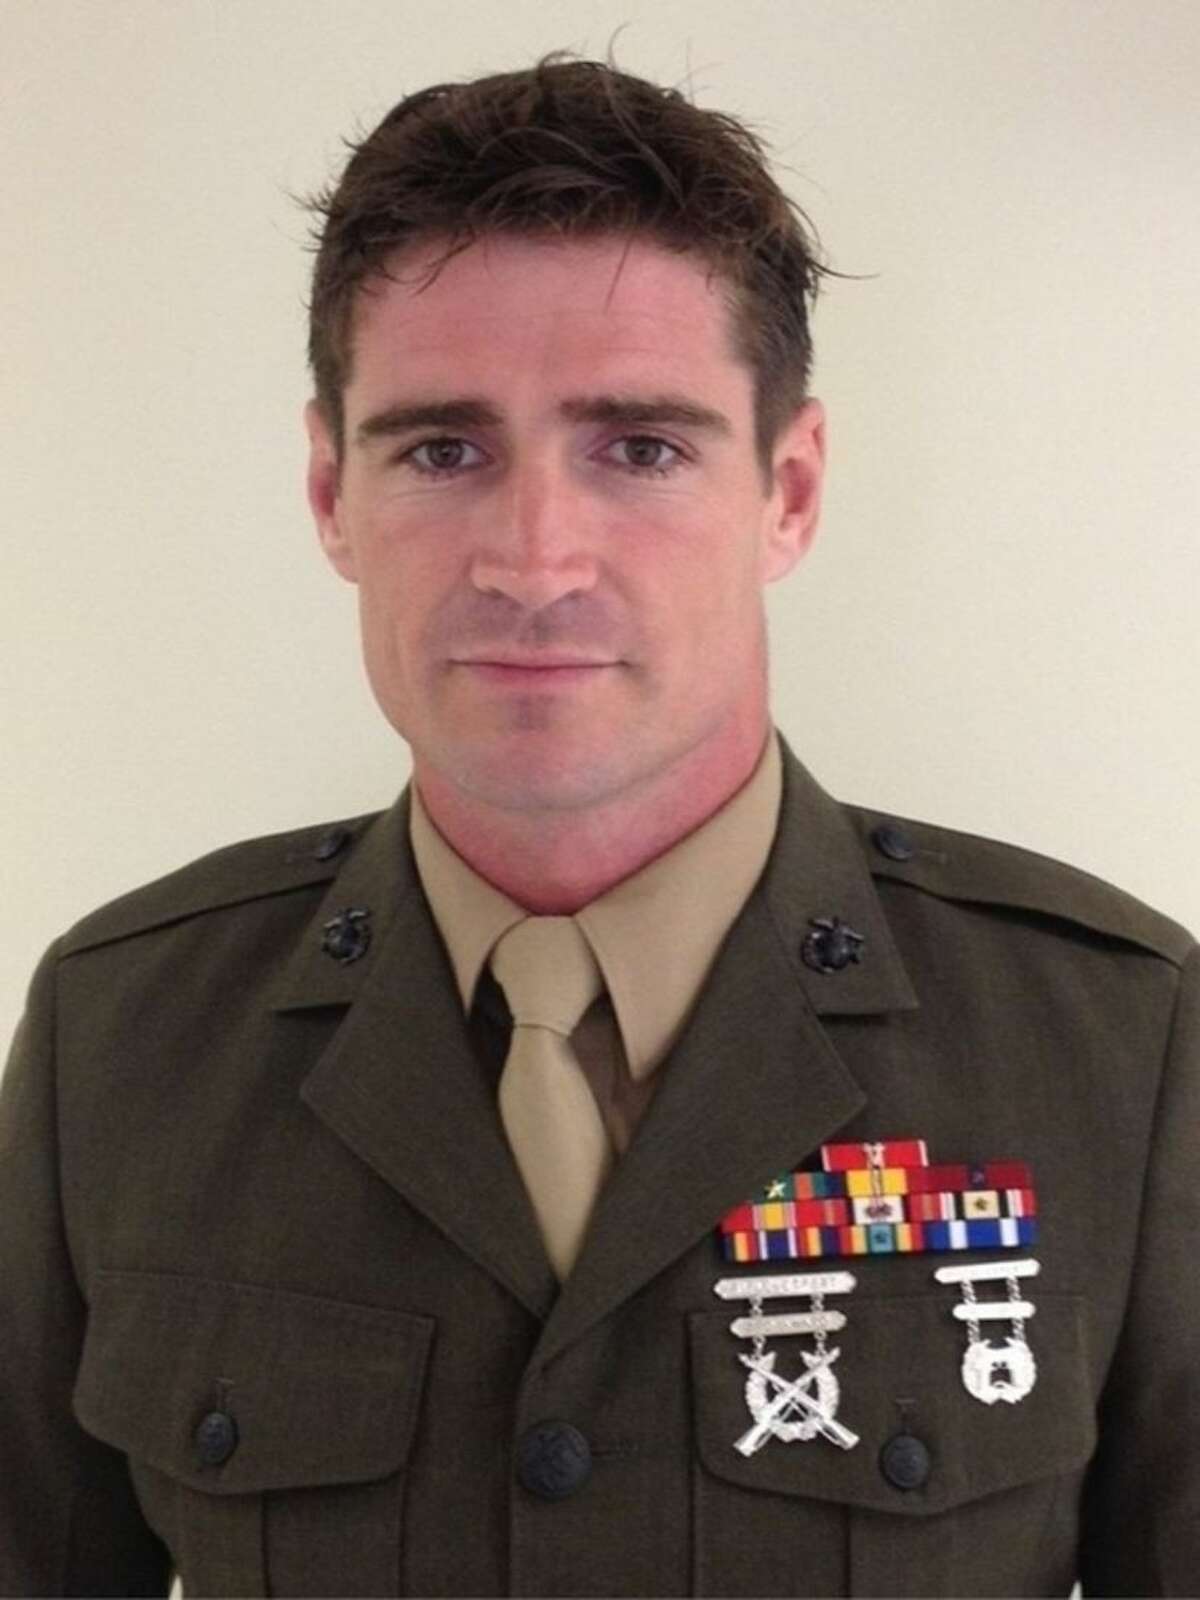 This image provided by the U.S. Marine Corps shows an undated photo of Staff Sgt. Liam Flynn, 33. Friday, March 13, 2015, military officials released the names of the Marines killed. All were from the 2nd Special Operations Battalion of the Marine Corps Special Operations Command, or MARSOC, at Camp Lejeune. Staff Sgt. Flynn was one of the seven Marines killed when the Black Hawk helicopter crashed in dense fog during a training mission in Florida. (AP Photo/US Marine Corps)